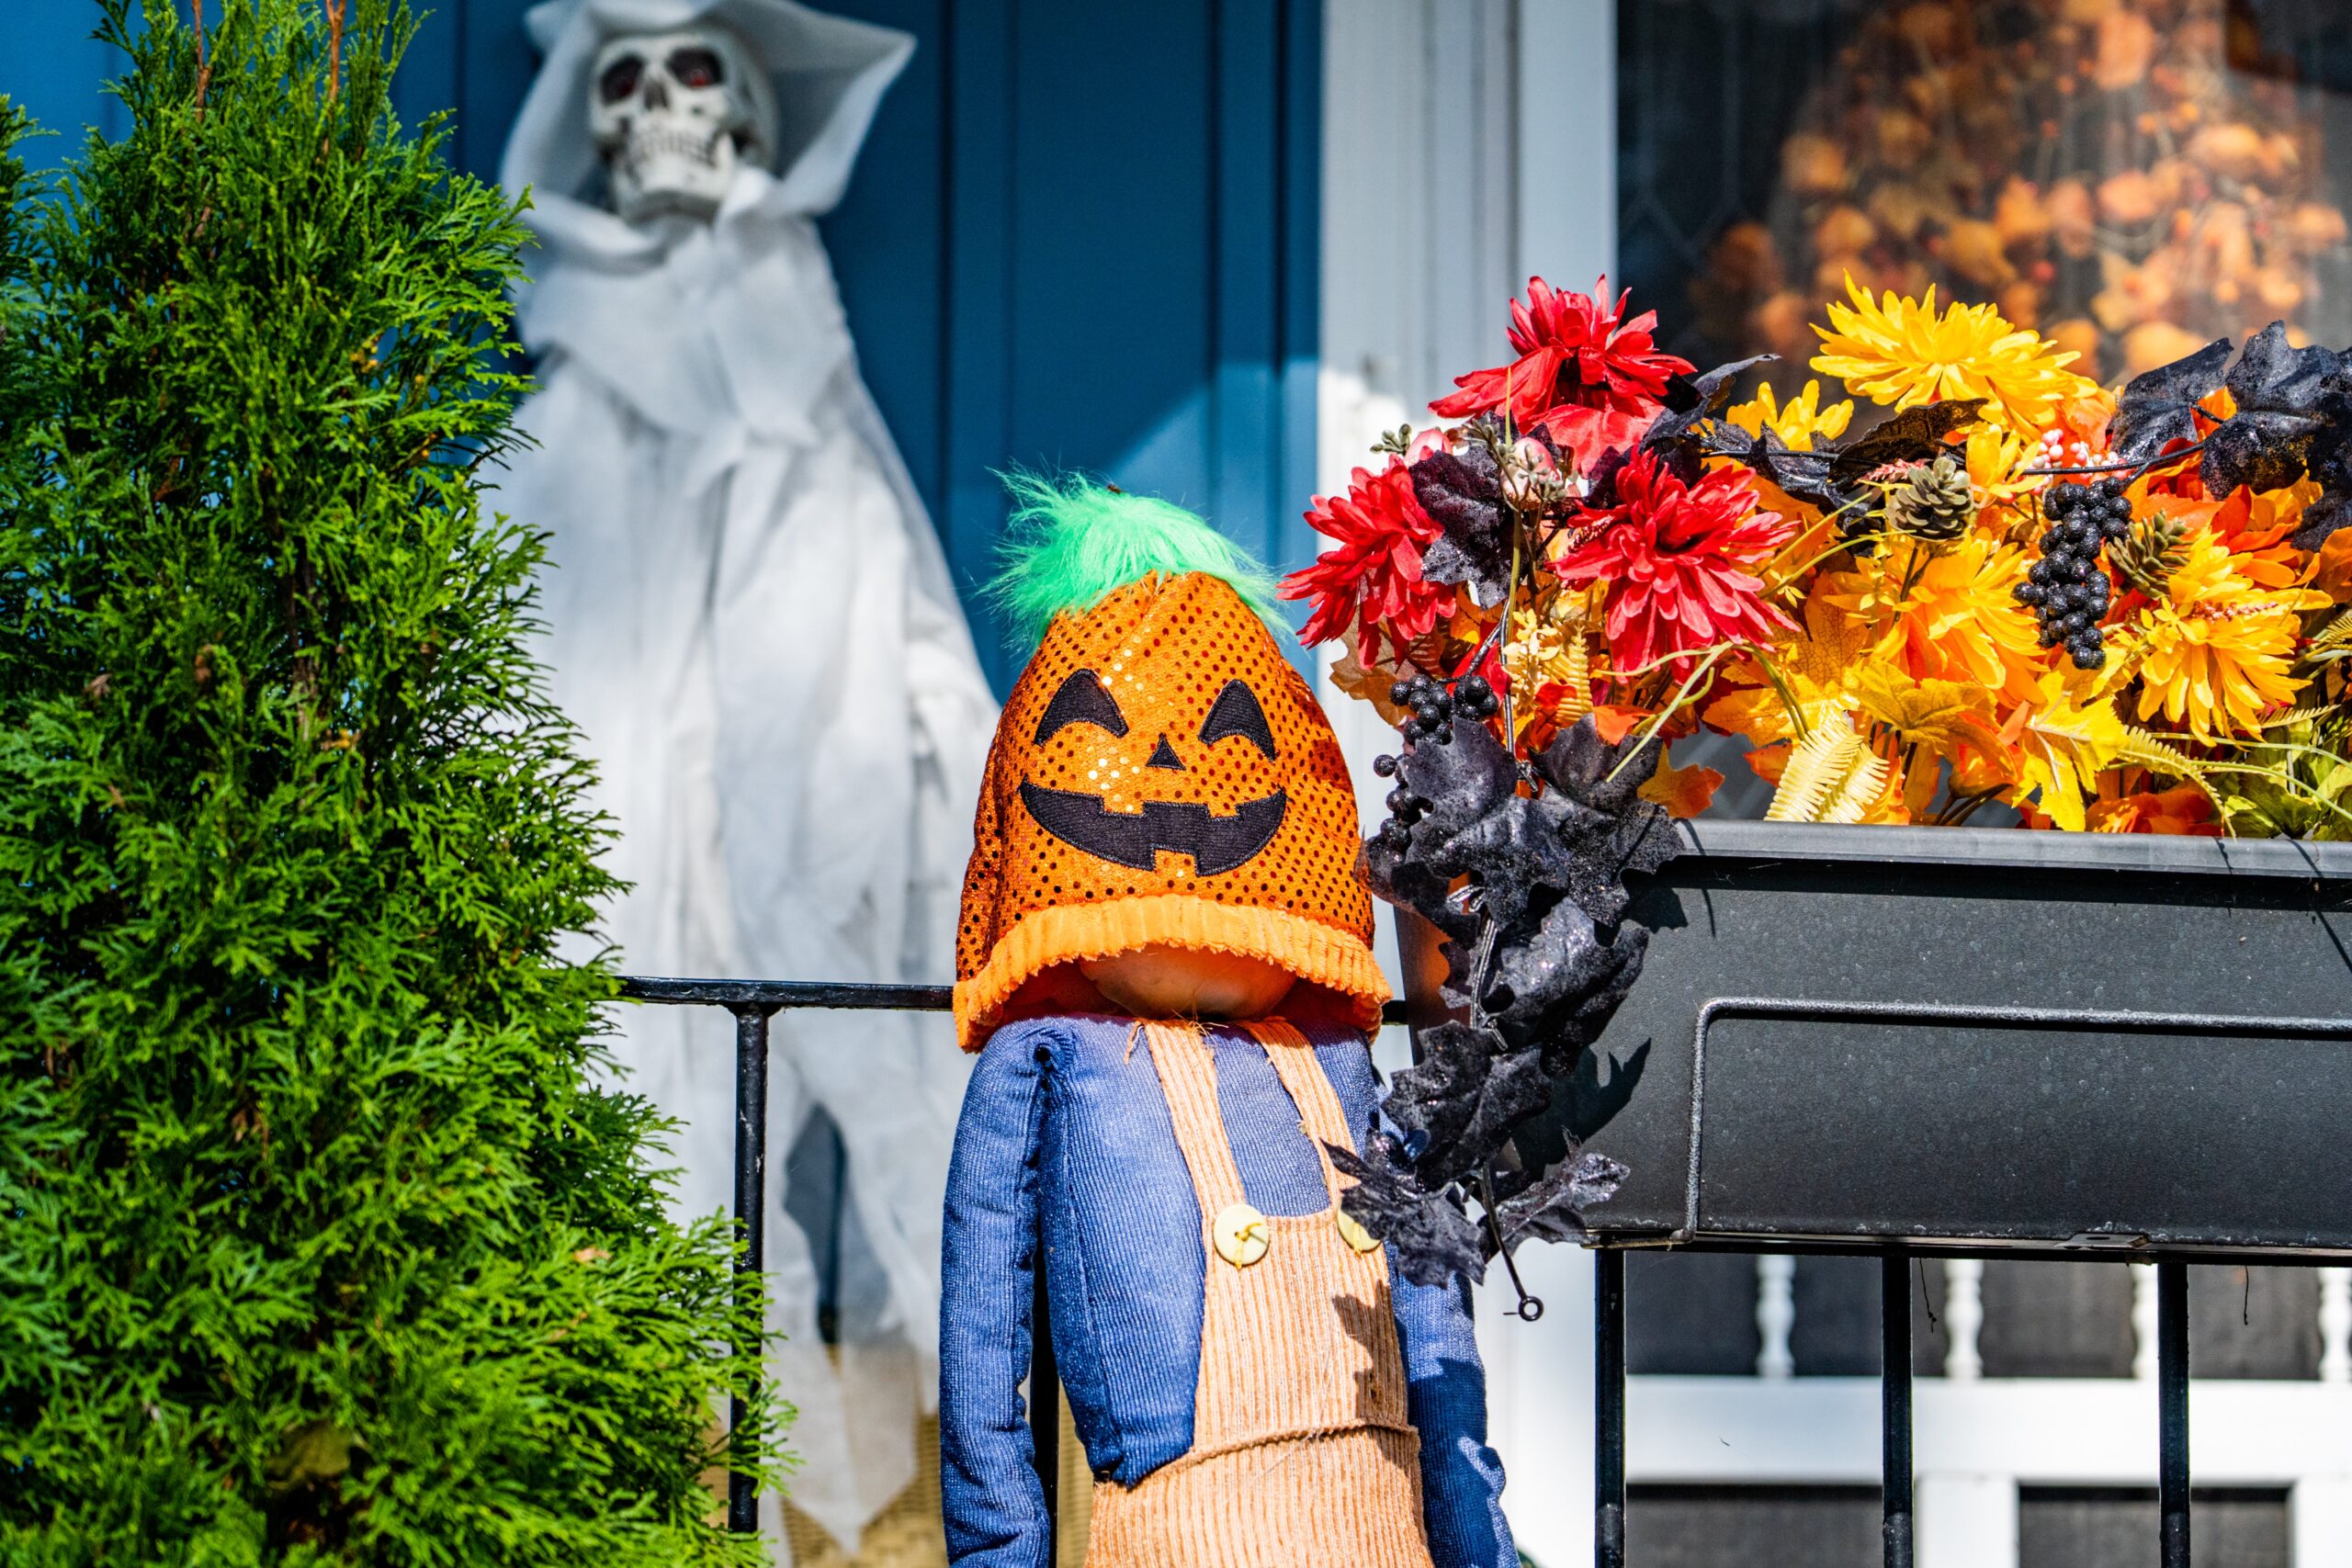 scarecrow with pumpkin head stood outside house.